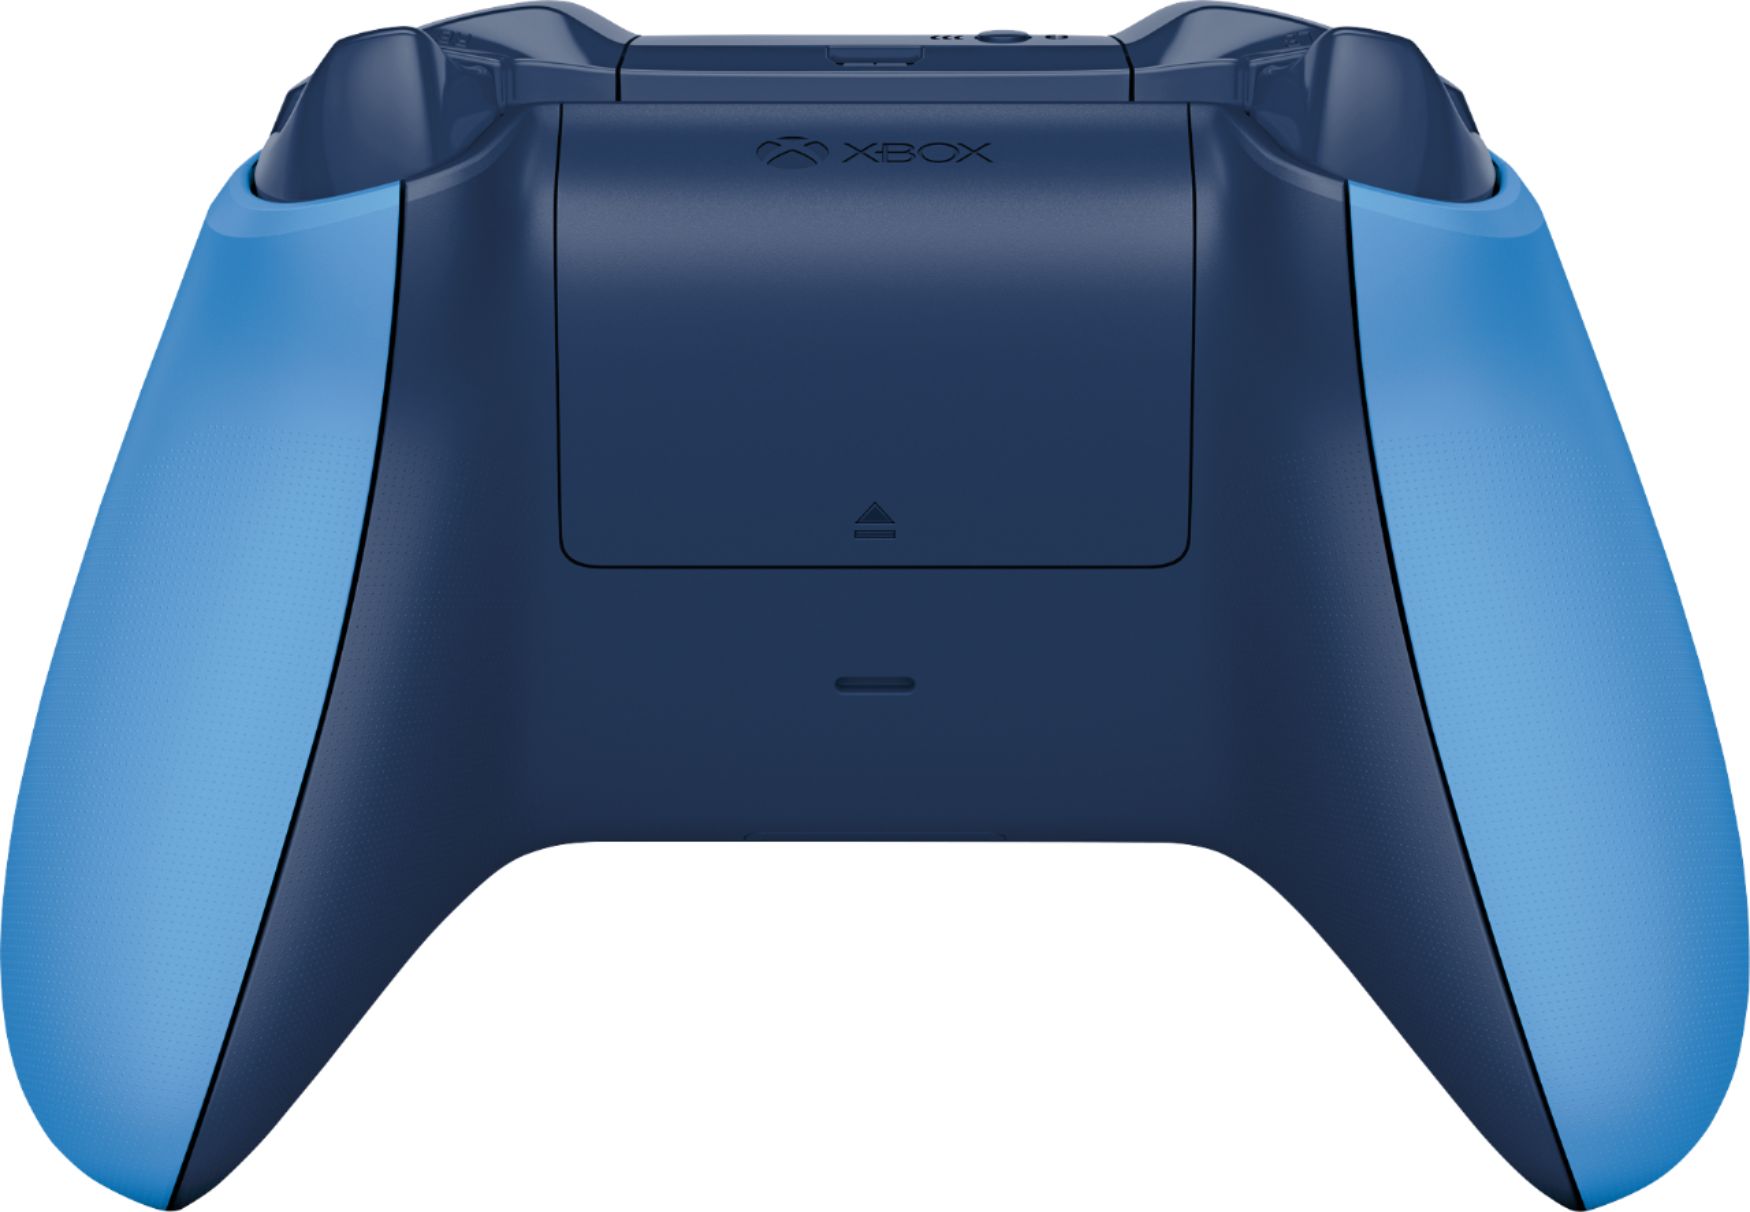 Back View: Microsoft - Geek Squad Certified Refurbished Wireless Controller for Xbox One and Windows 10 - Blue